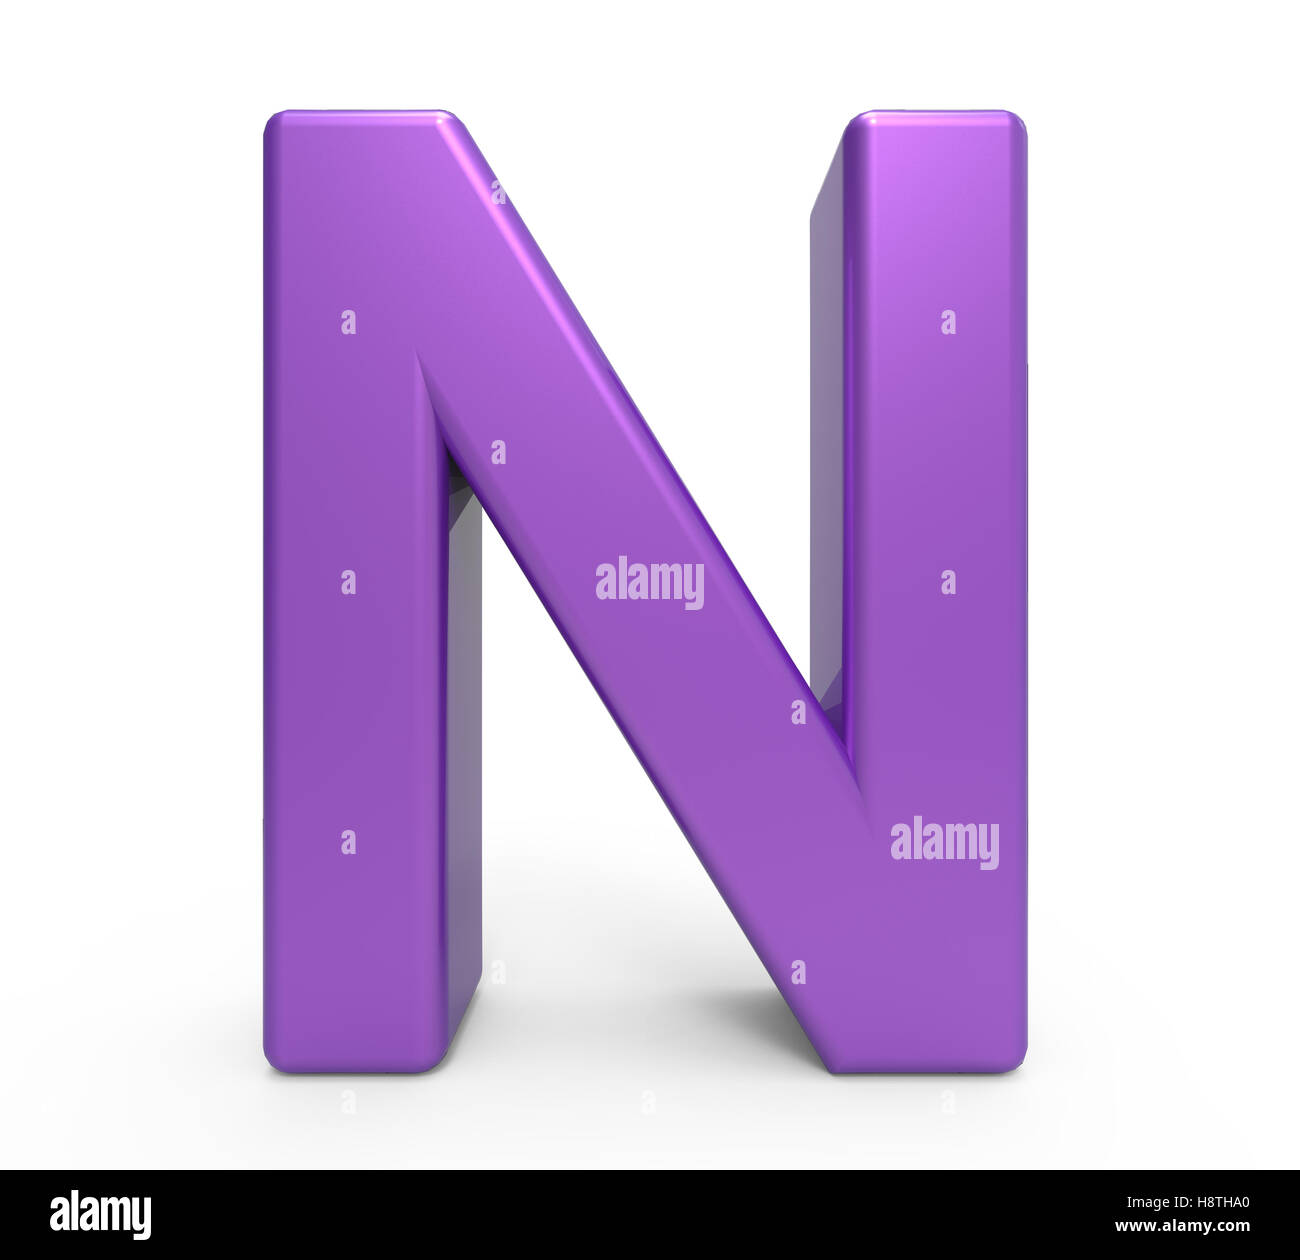 Letter N made from natural elements - Impossible Images - Unique stock  images for commercial use.